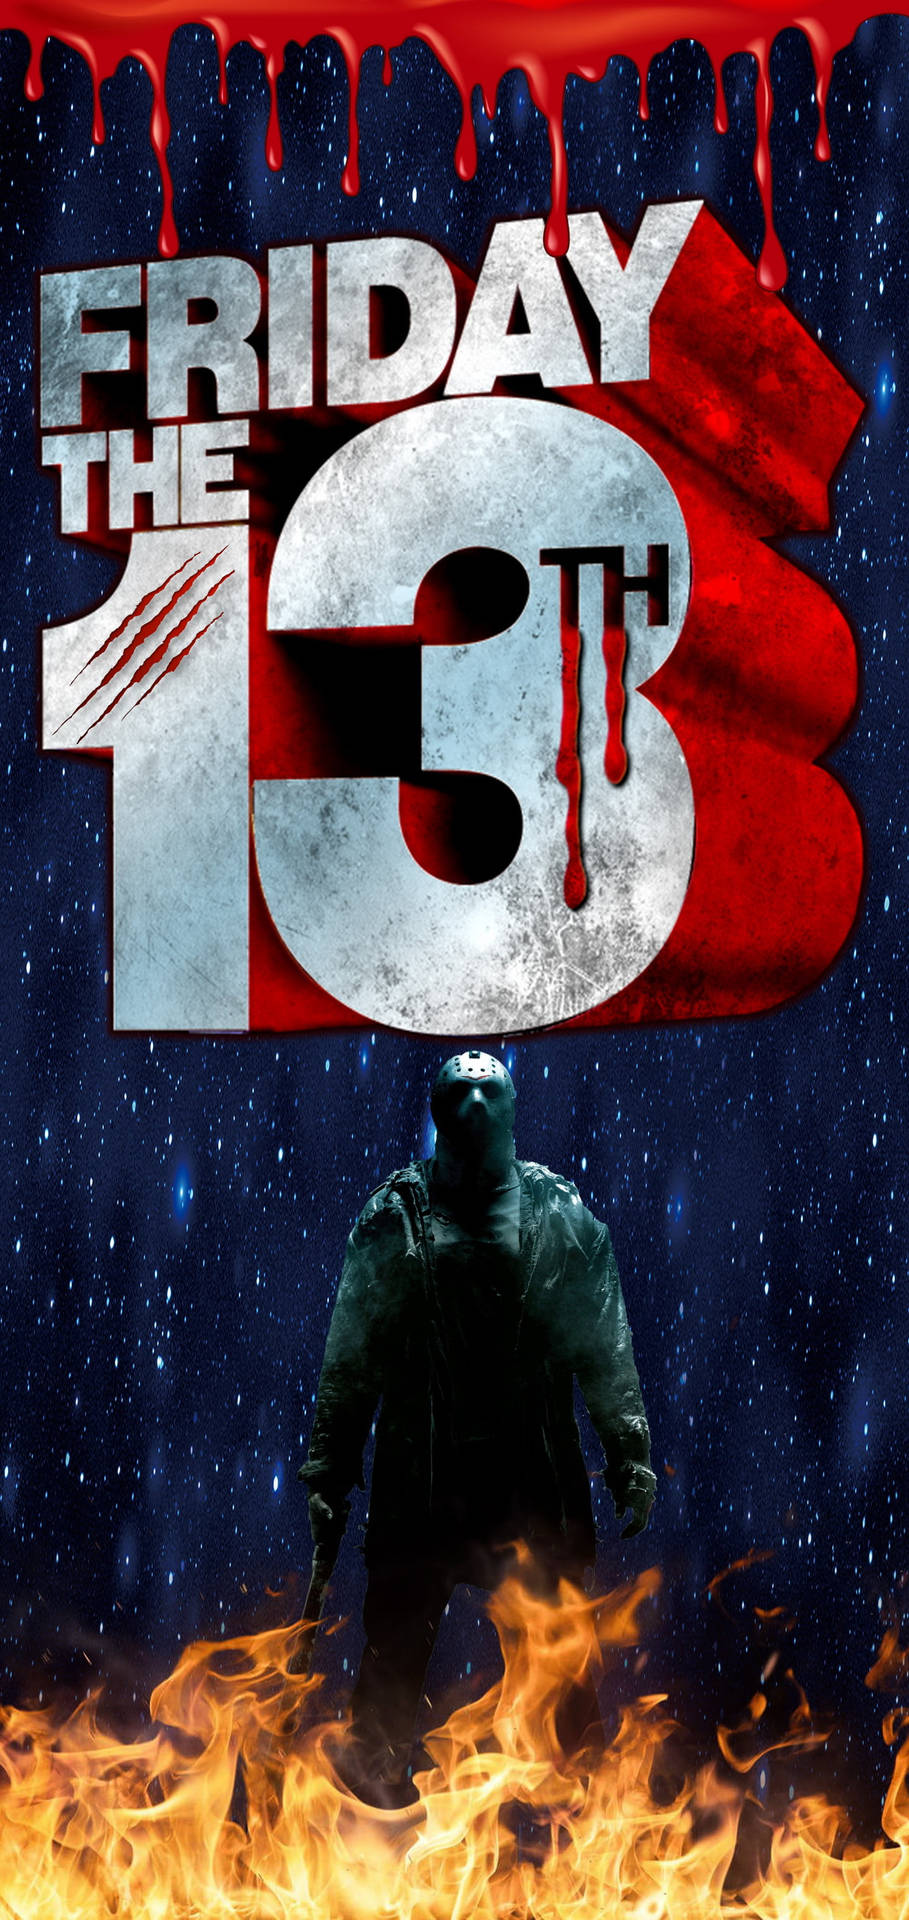 Bloody Friday The 13th Movie Poster Wallpaper